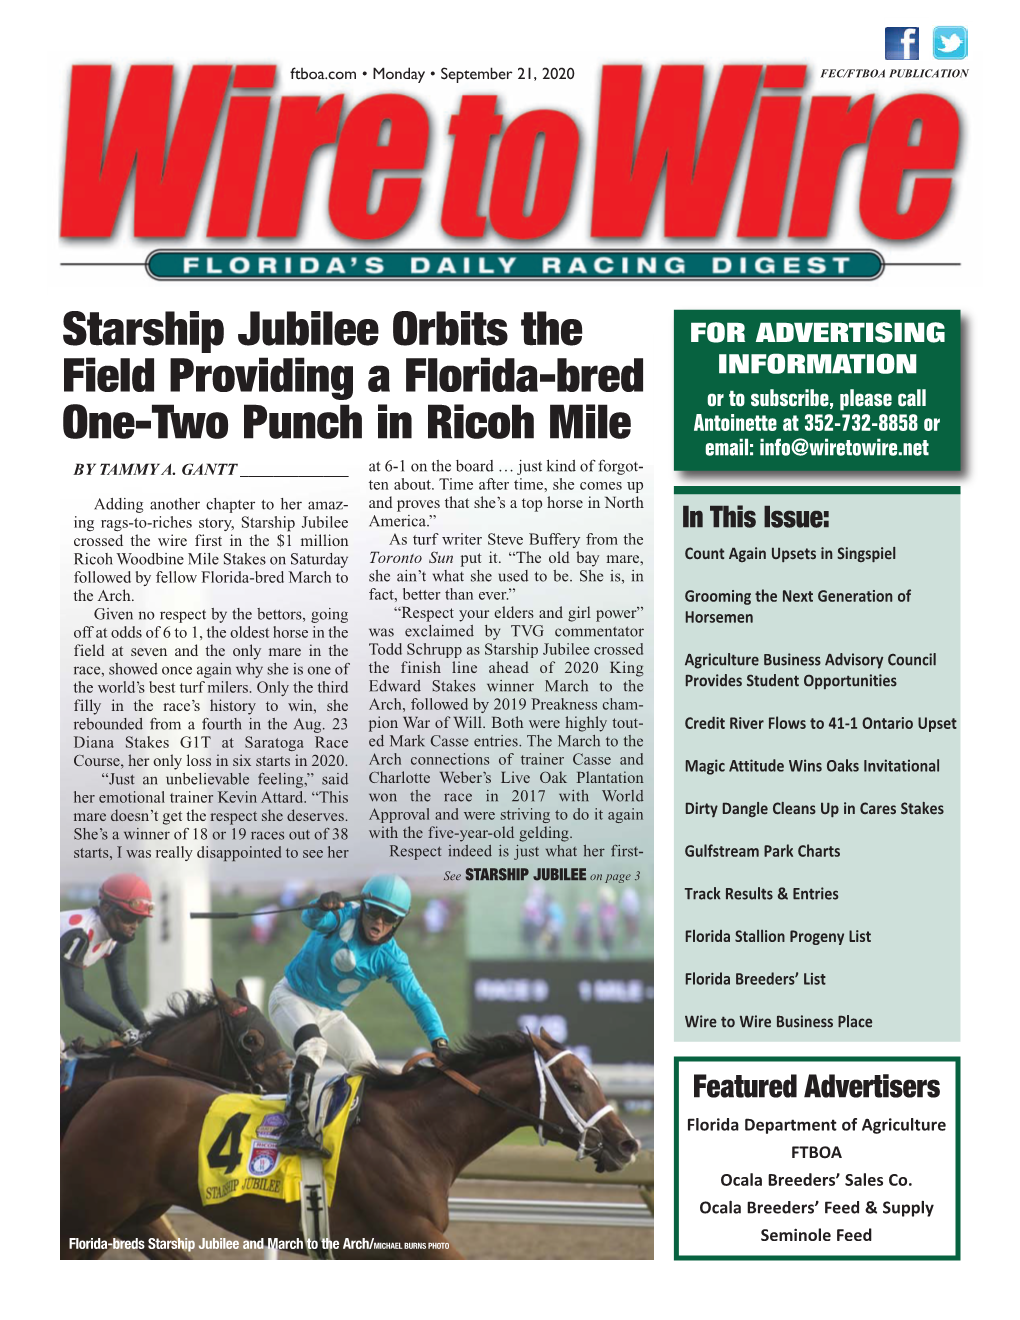 Starship Jubilee Orbits the Field Providing a Florida-Bred One-Two